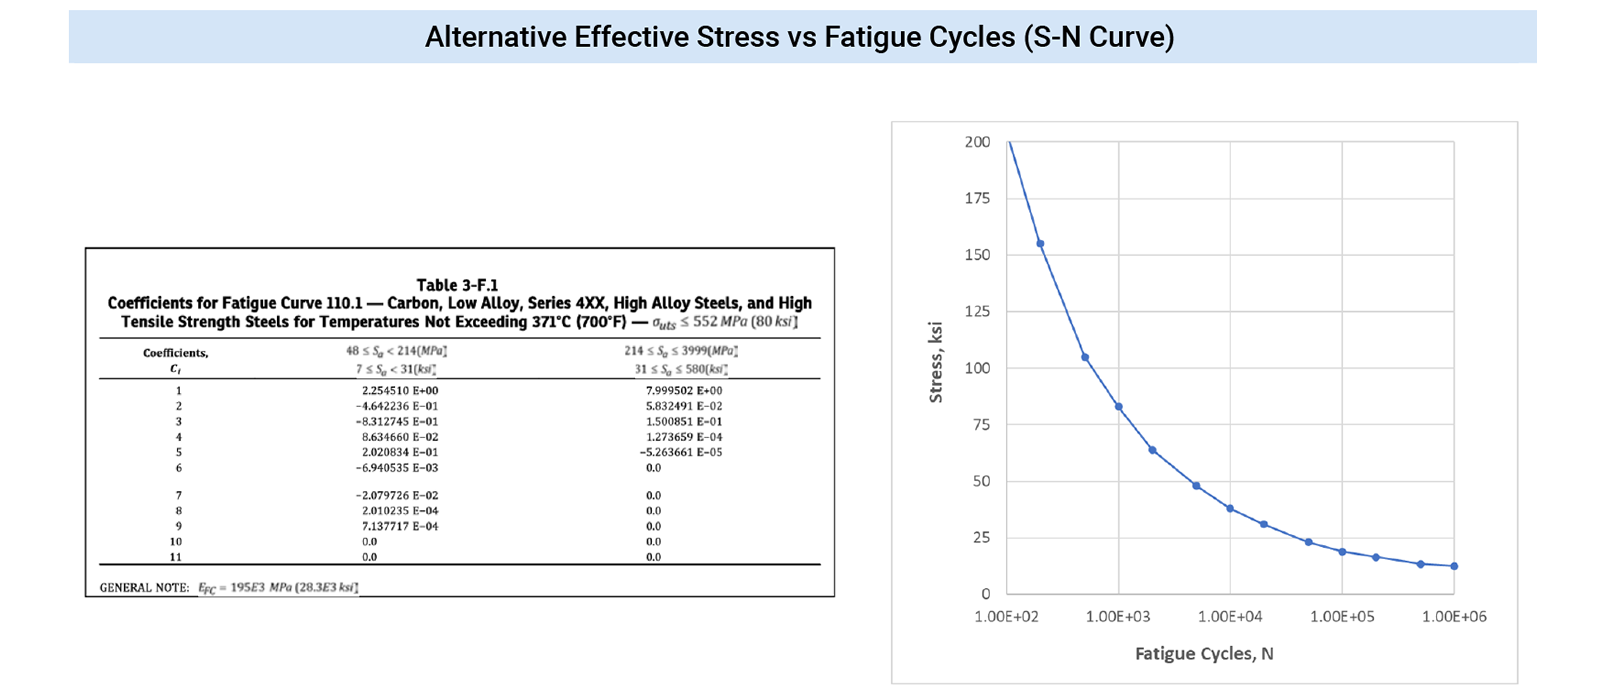  Application of ASME Section VIII, Division 2, Part 5.5 Protection Against Failure from Cyclic Loading Fatigue Code 3-F.1 ASME Smooth Bar Fatigue Curves - Predictive Engineering FEA Pressure Vessel and ASME Structures Consultants